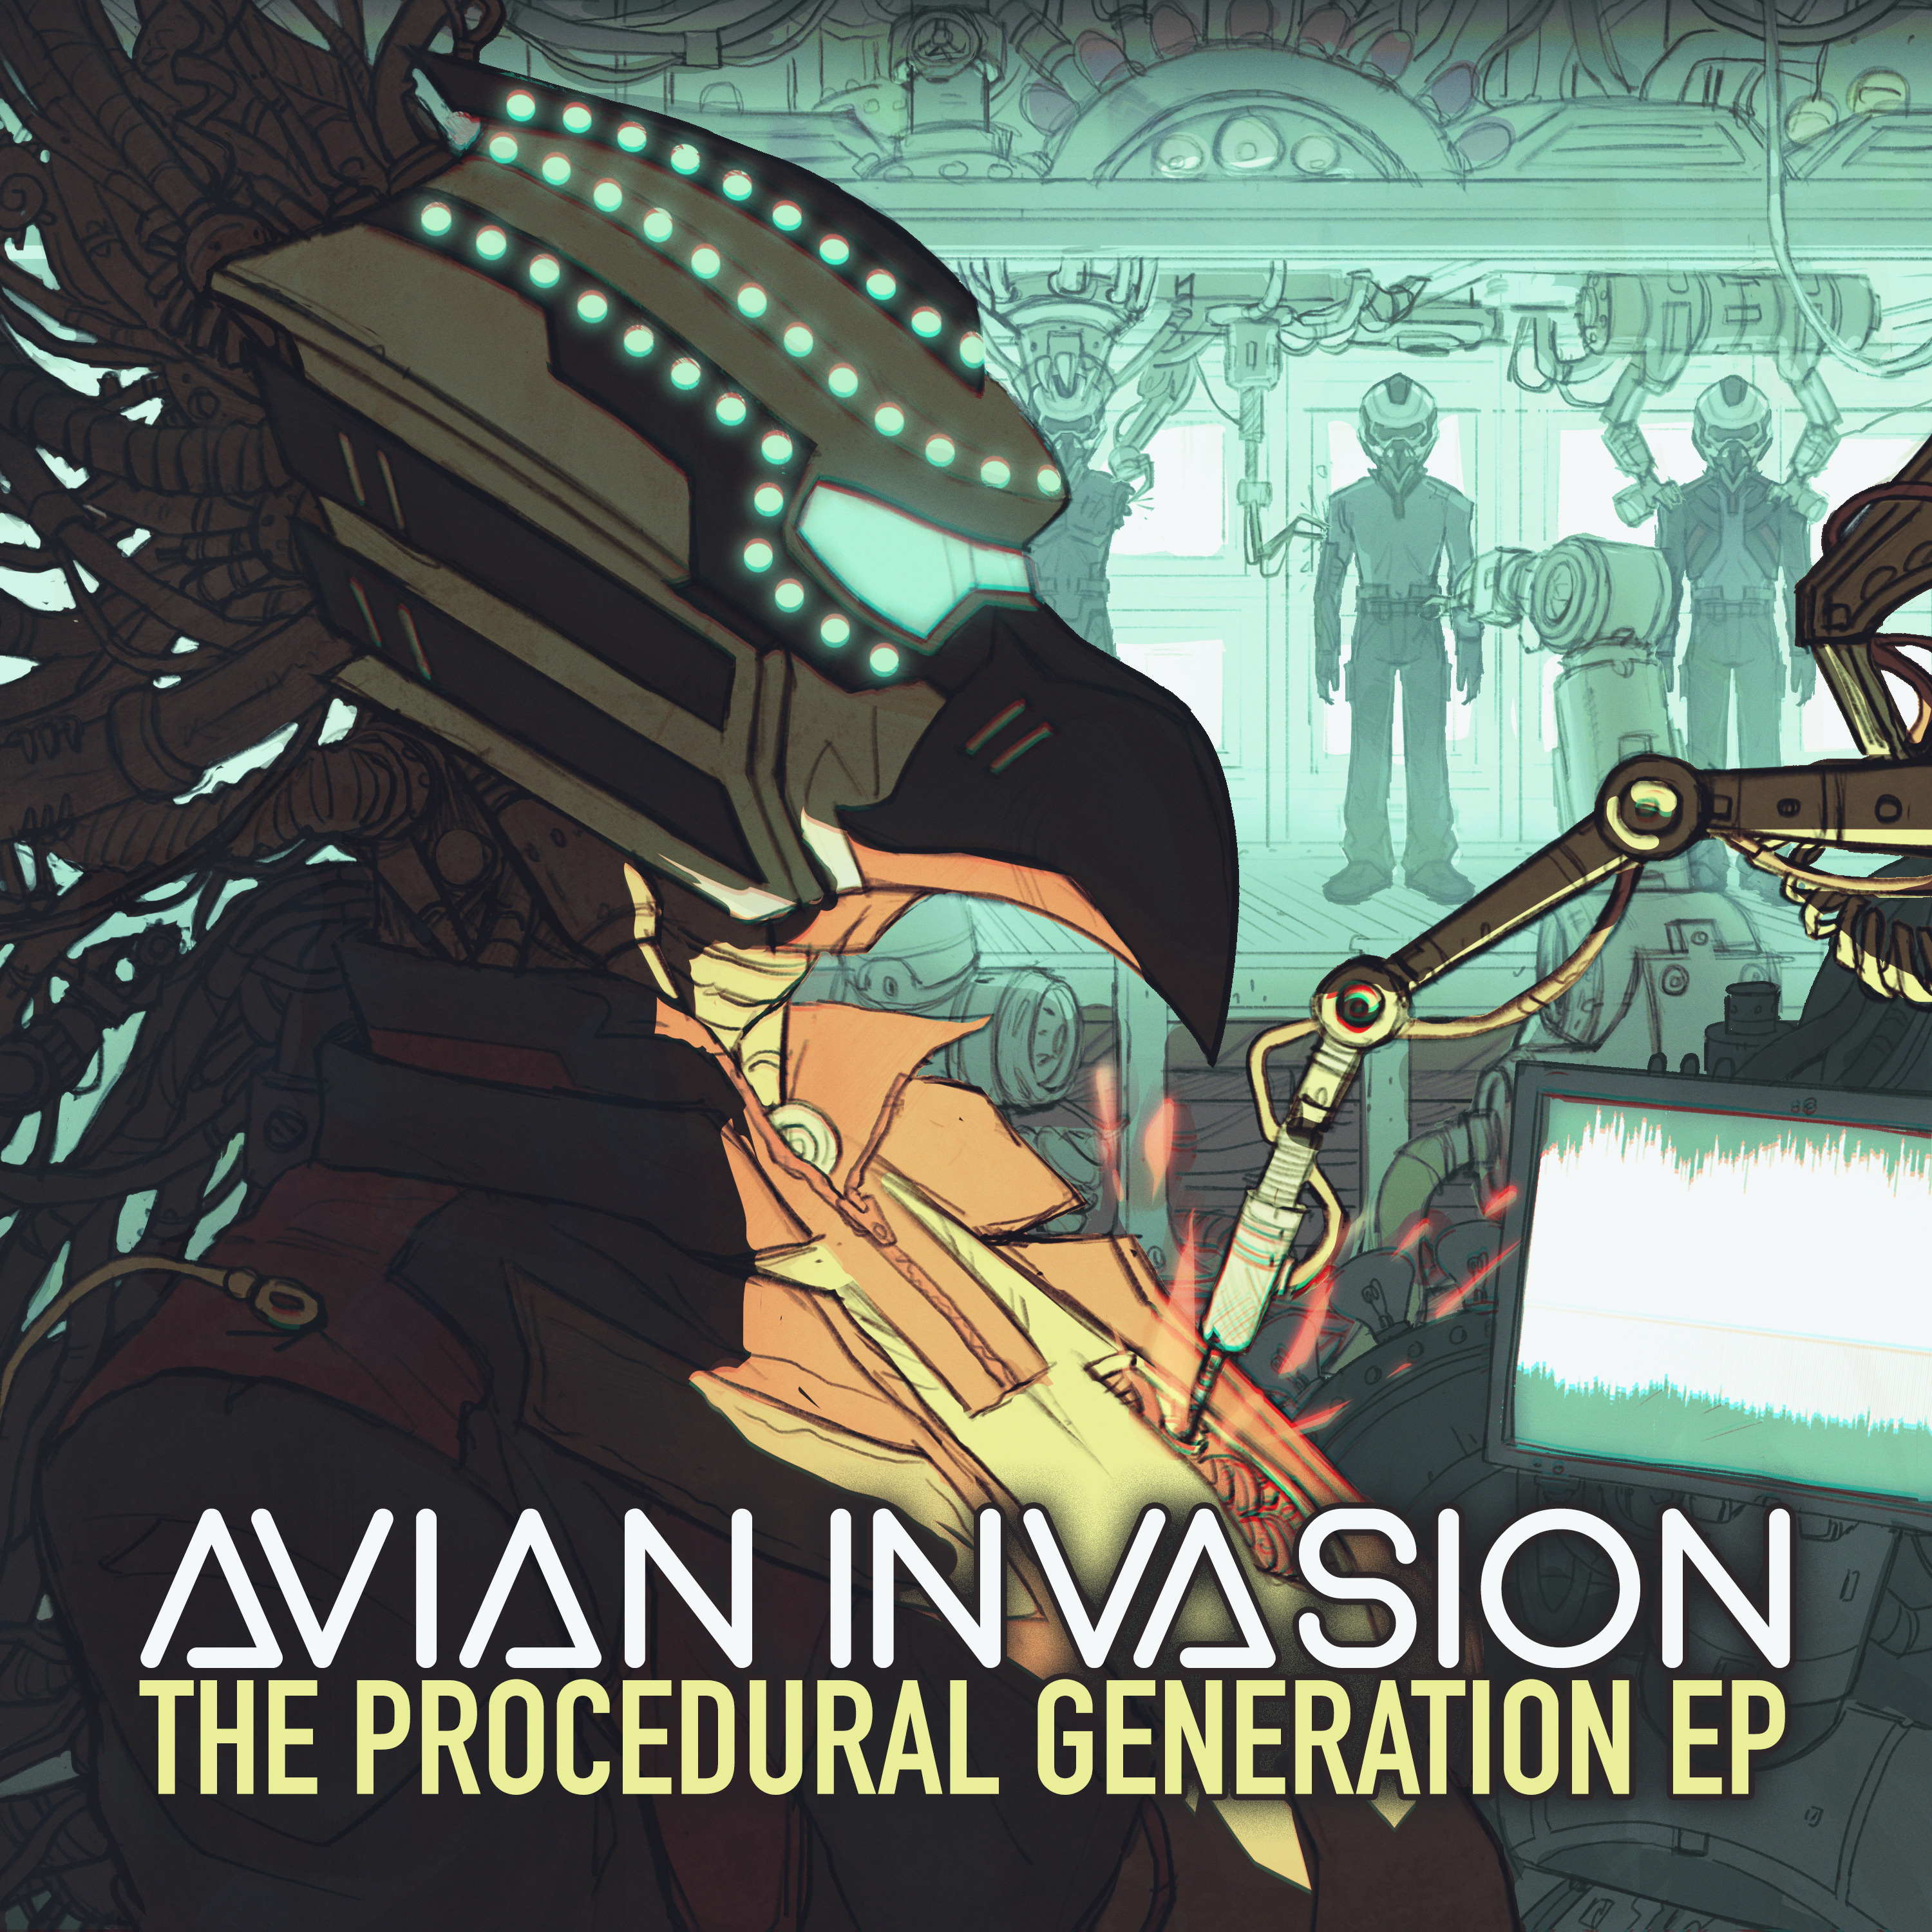 The Procedural Generation EP